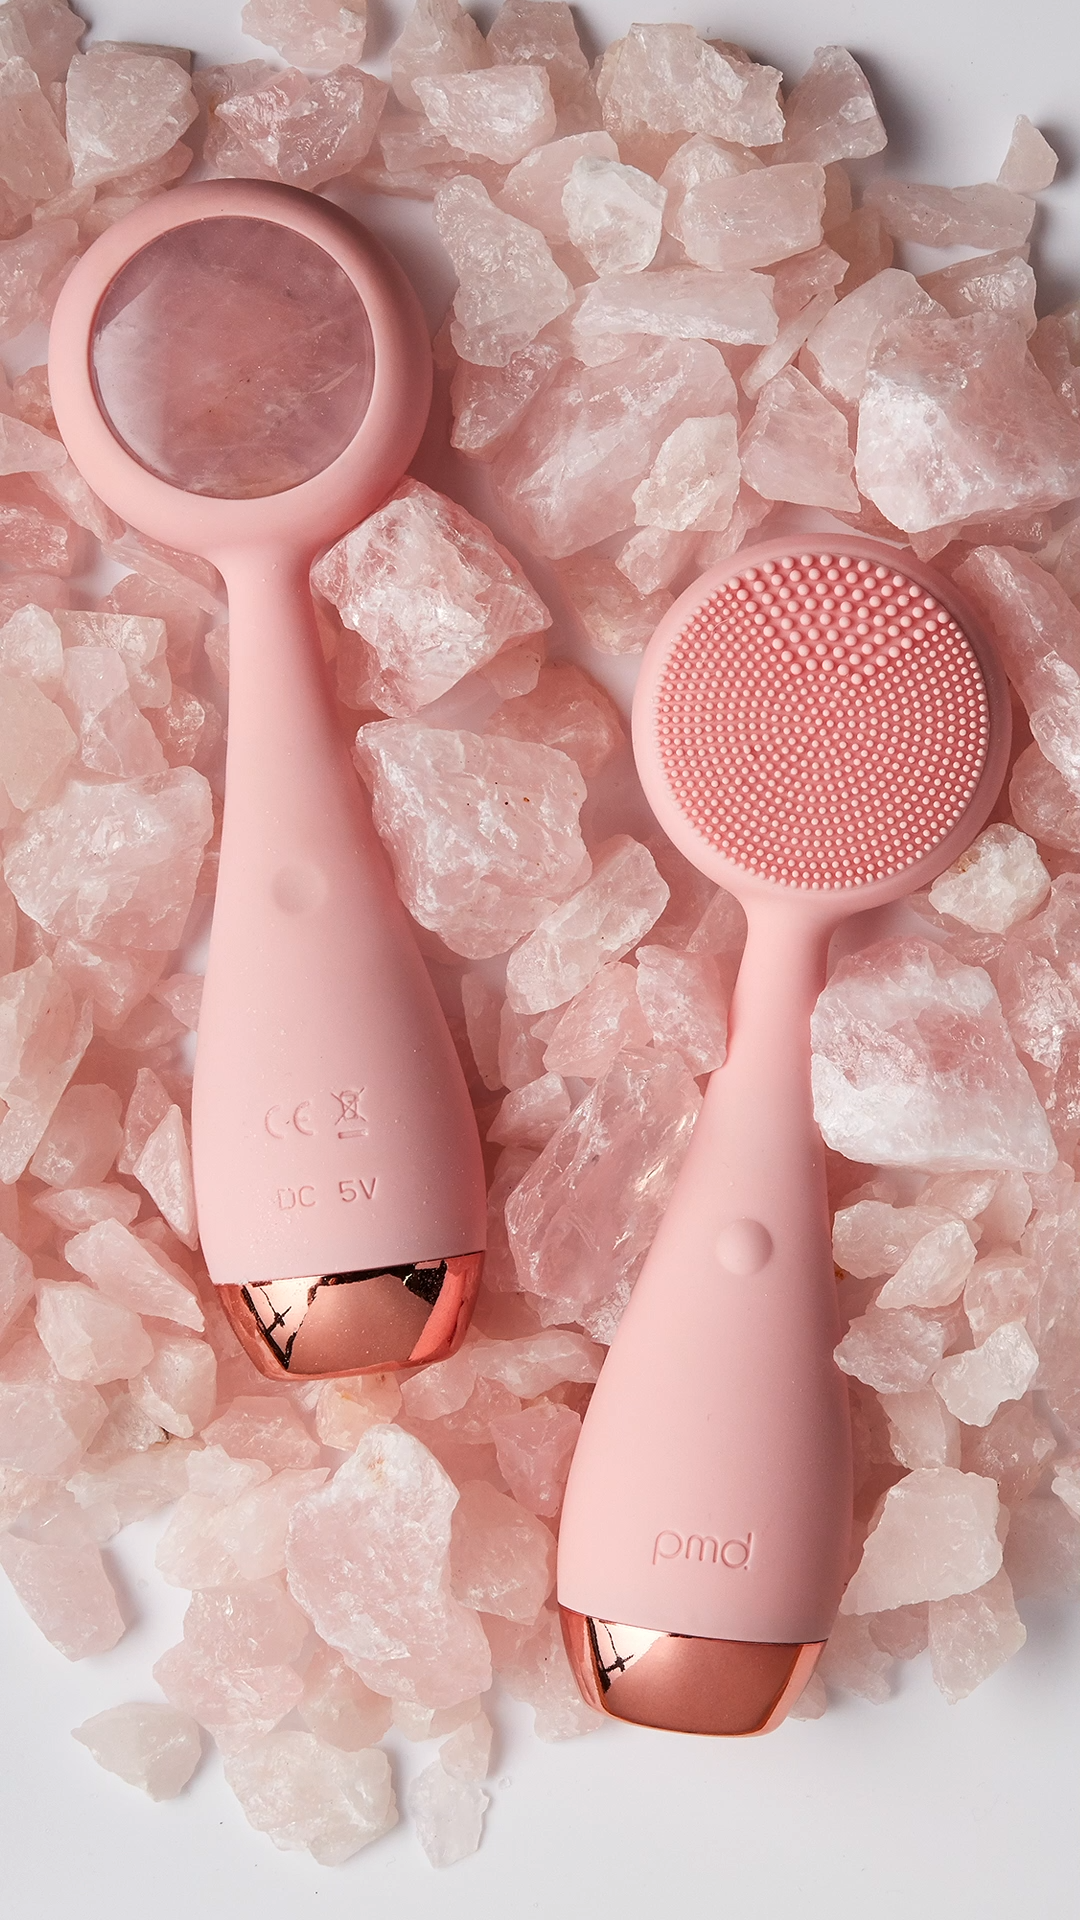 Rose Quartz Facial with the PMD Clean Pro RQ - Rose Quartz Facial with the PMD Clean Pro RQ -   beauty Spa pictures